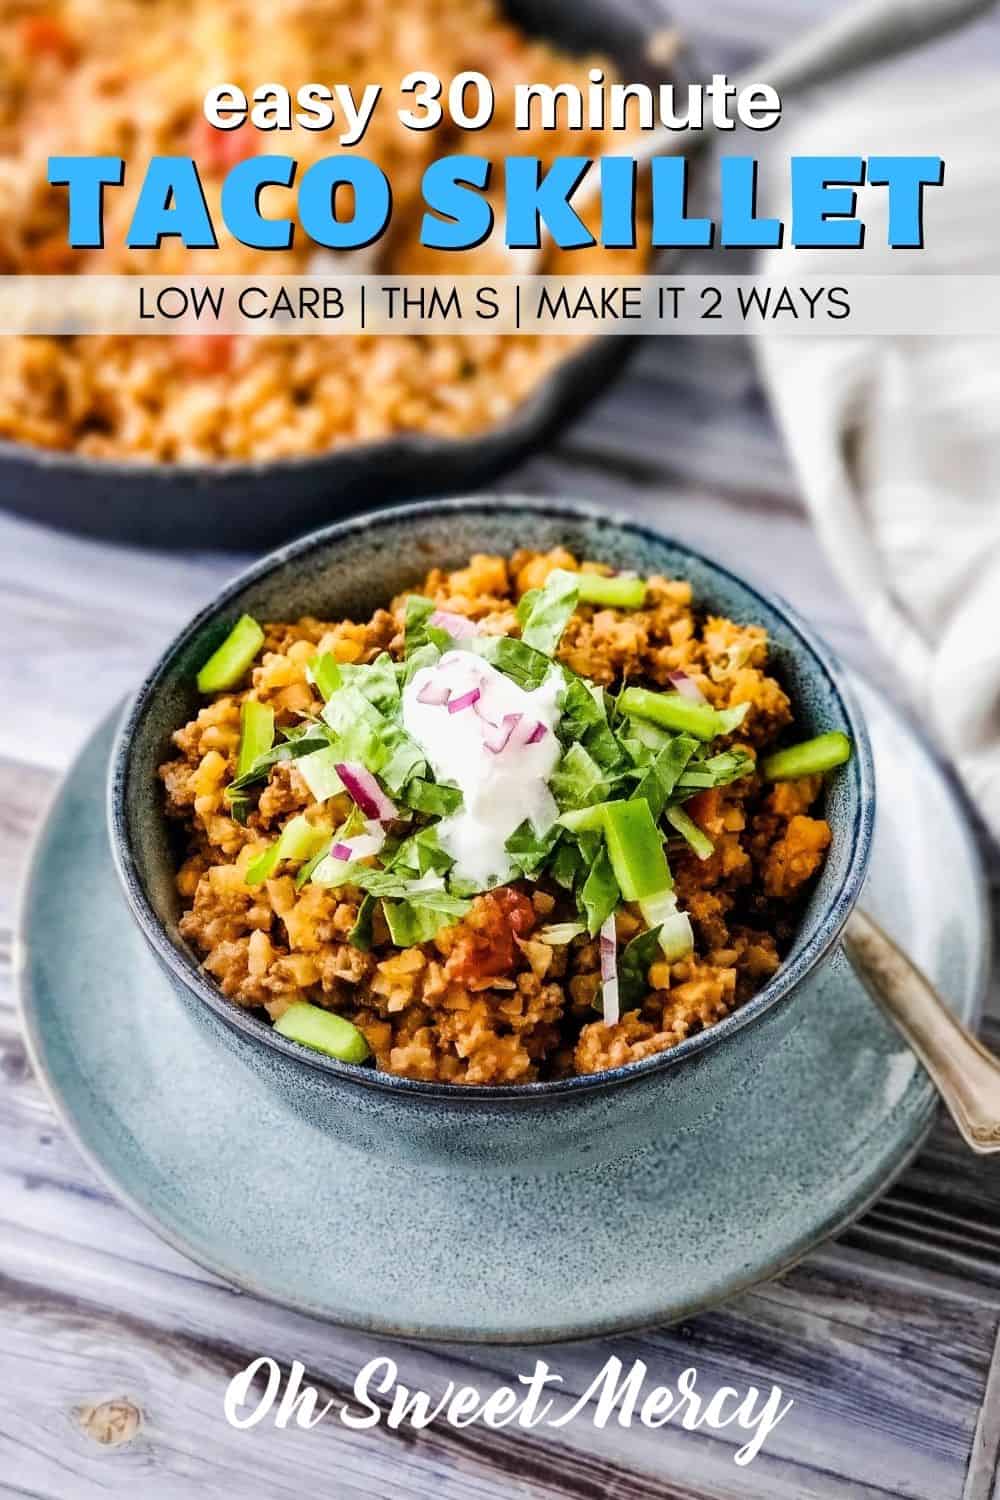 Easy, 30 minute low carb taco skillet? Yes please! Perfect for busy nights, make with either riced cauliflower or Dreamfields pasta. THM S. #thm #lowcarb #keto #tacotuesday #skilletmeals #30minutemeals @ohsweetmercy